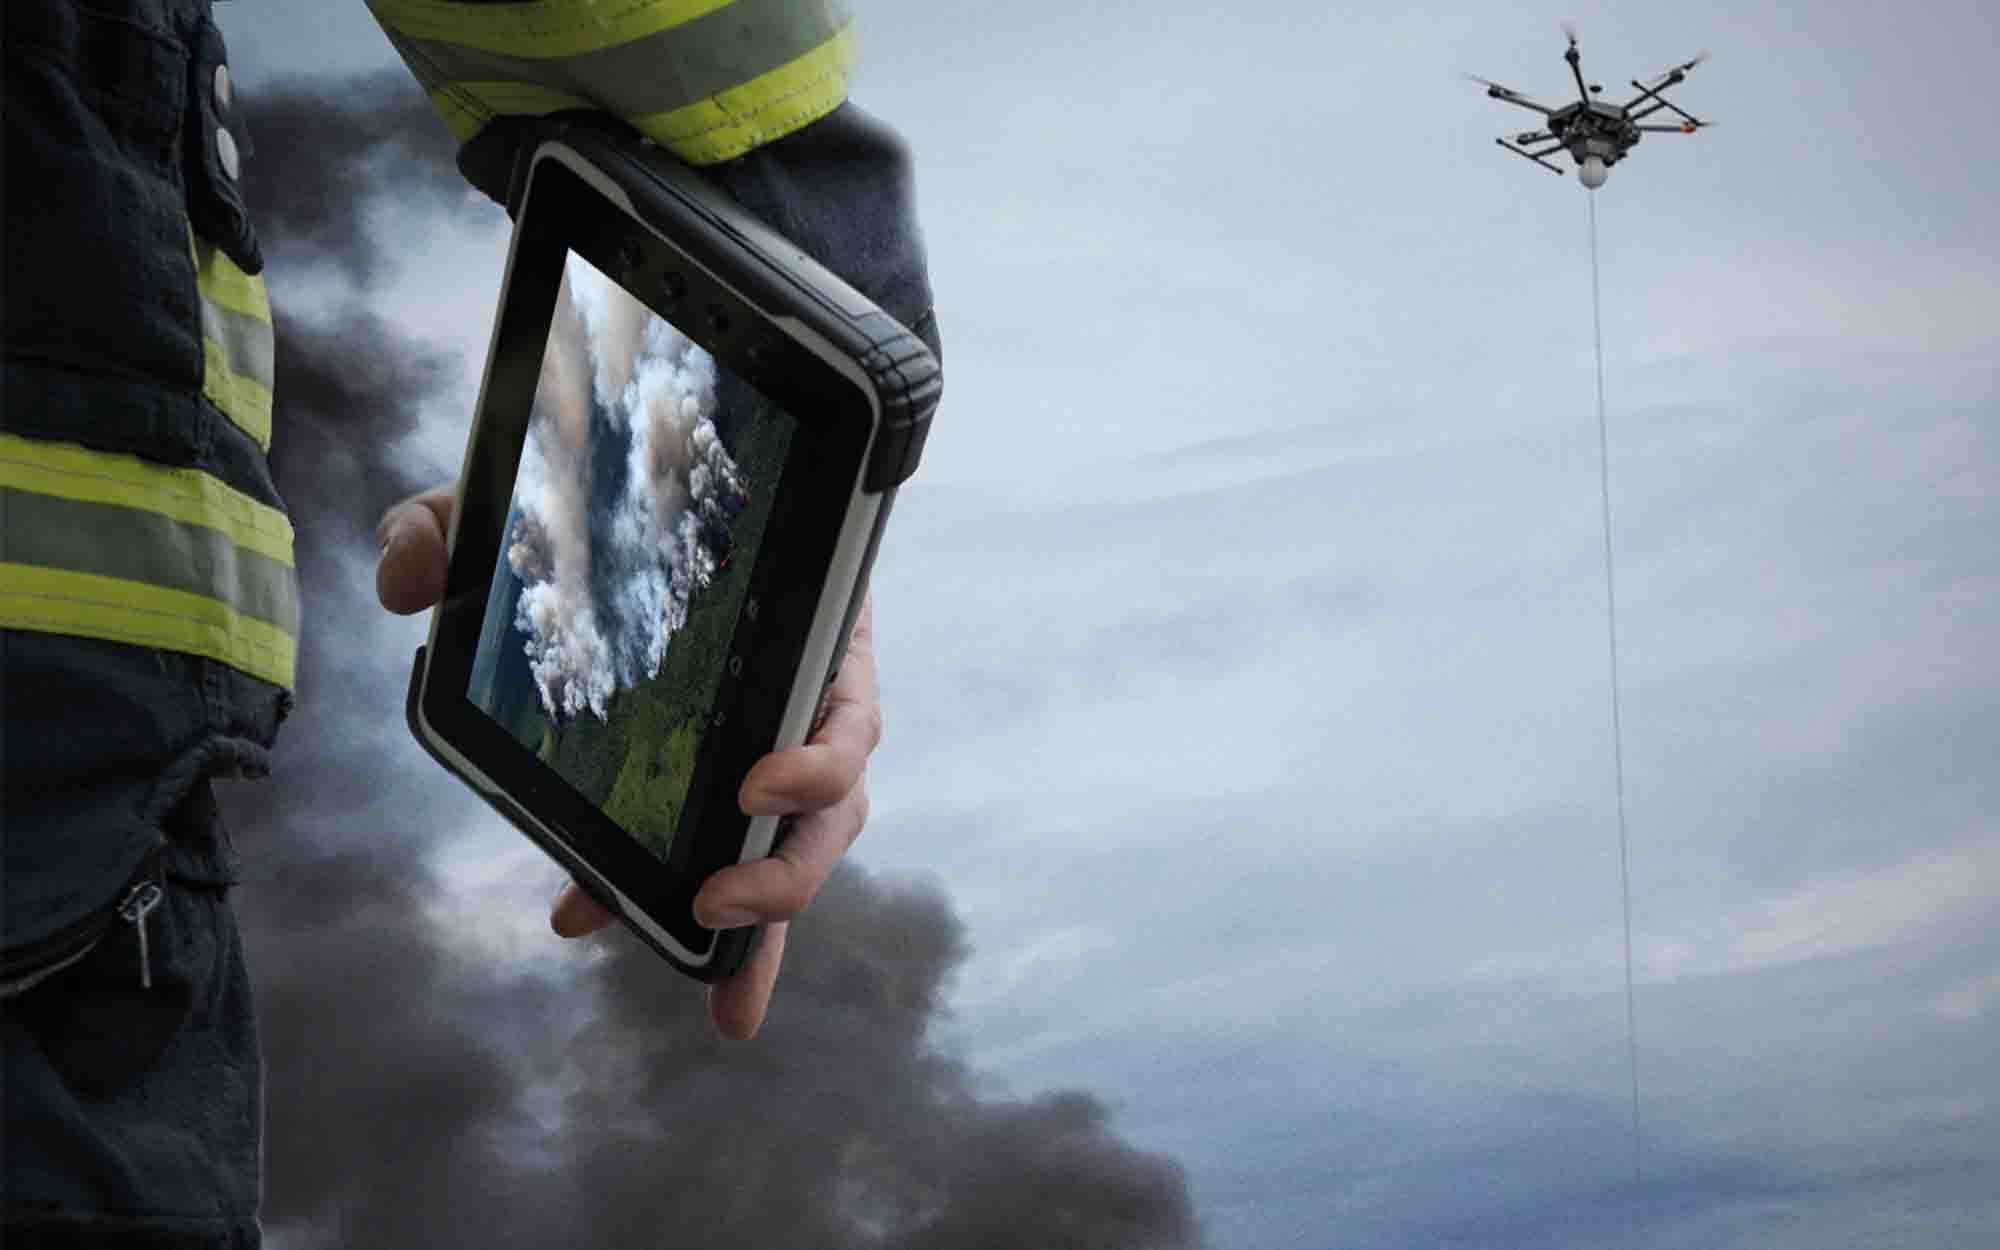 Tethered drone being used for firefighting operations